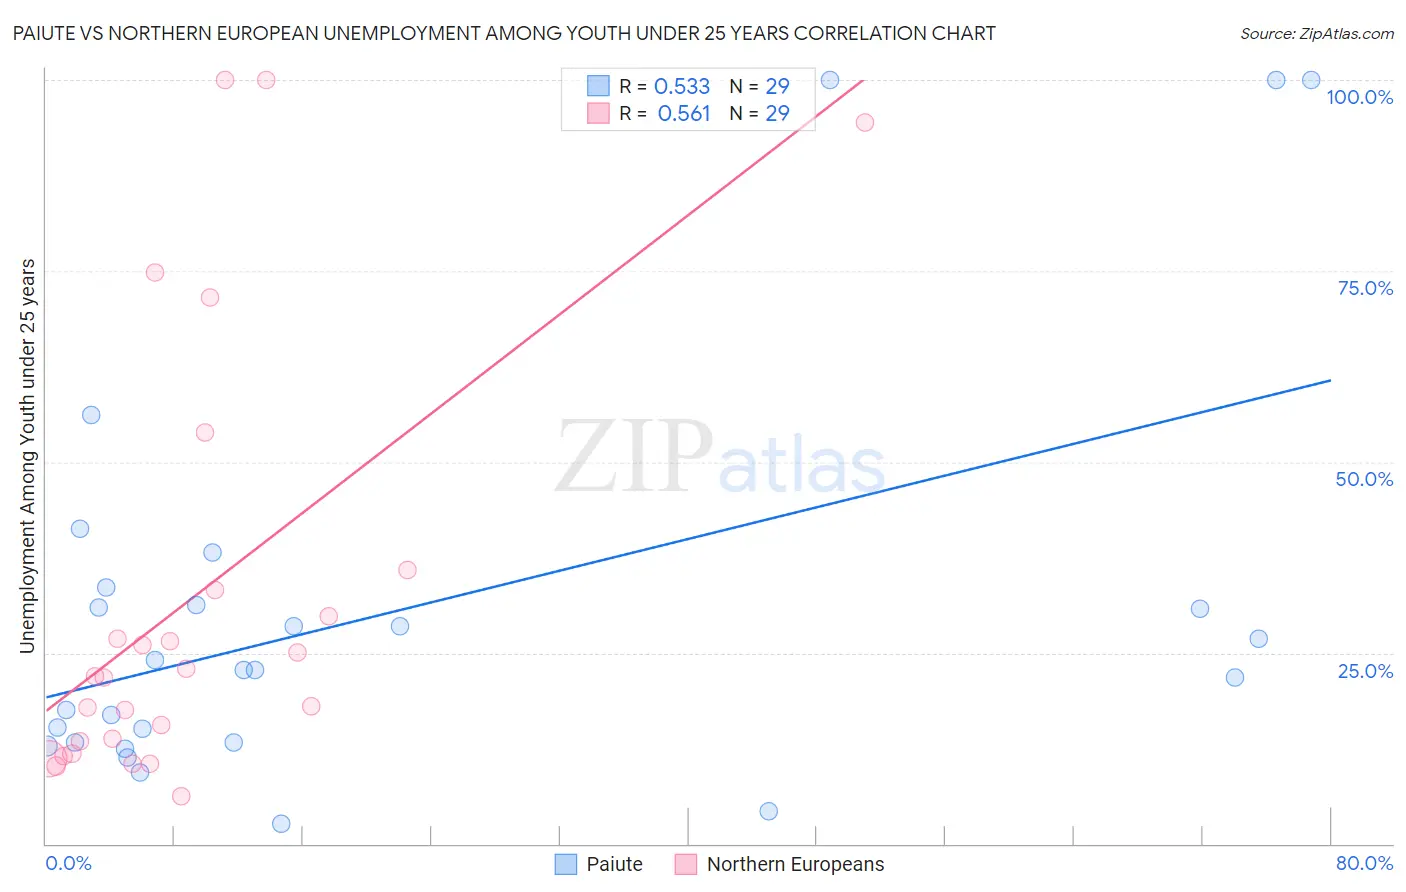 Paiute vs Northern European Unemployment Among Youth under 25 years